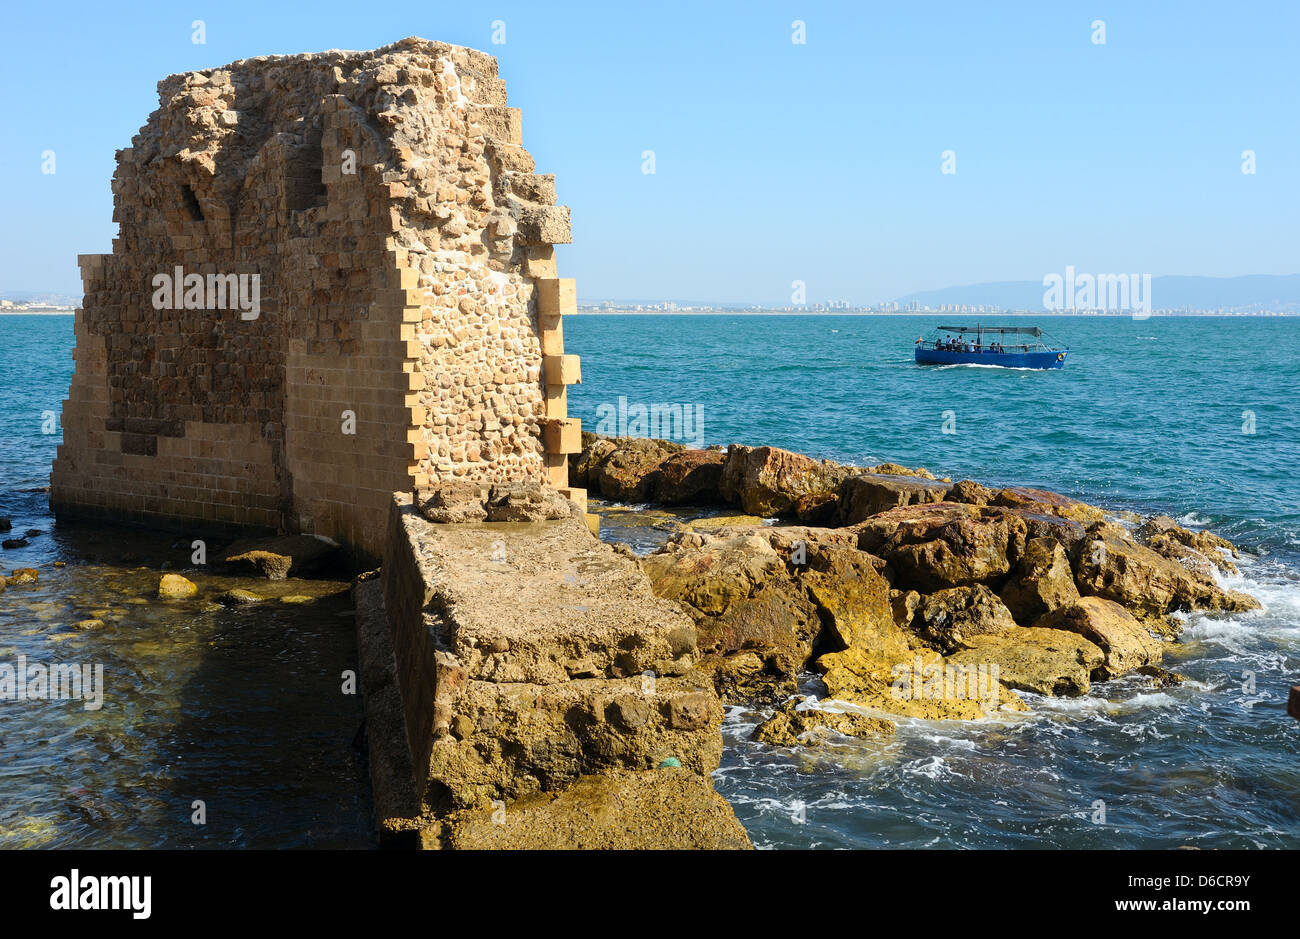 Remains of fortress walls of the Acre Stock Photo